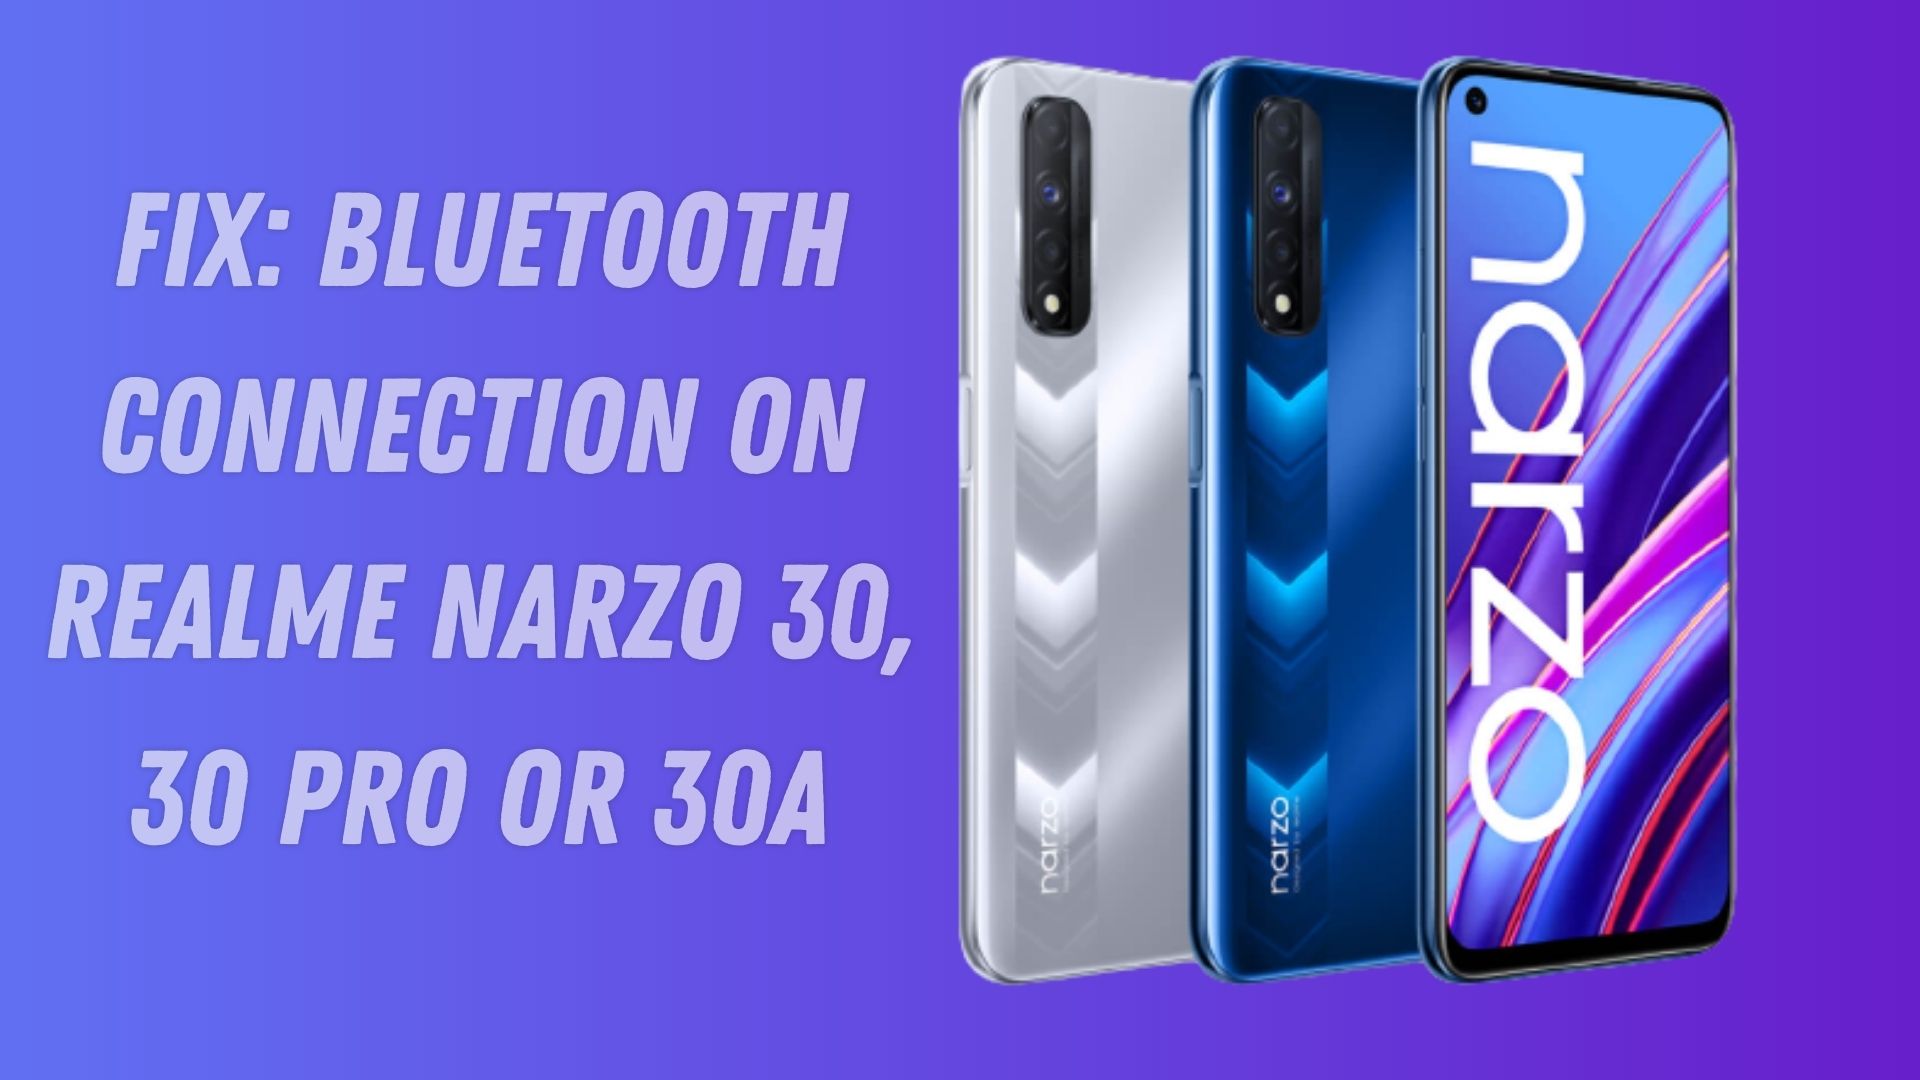 Fix: Bluetooth Connection on Realme Narzo 30, 30 Pro or 30A